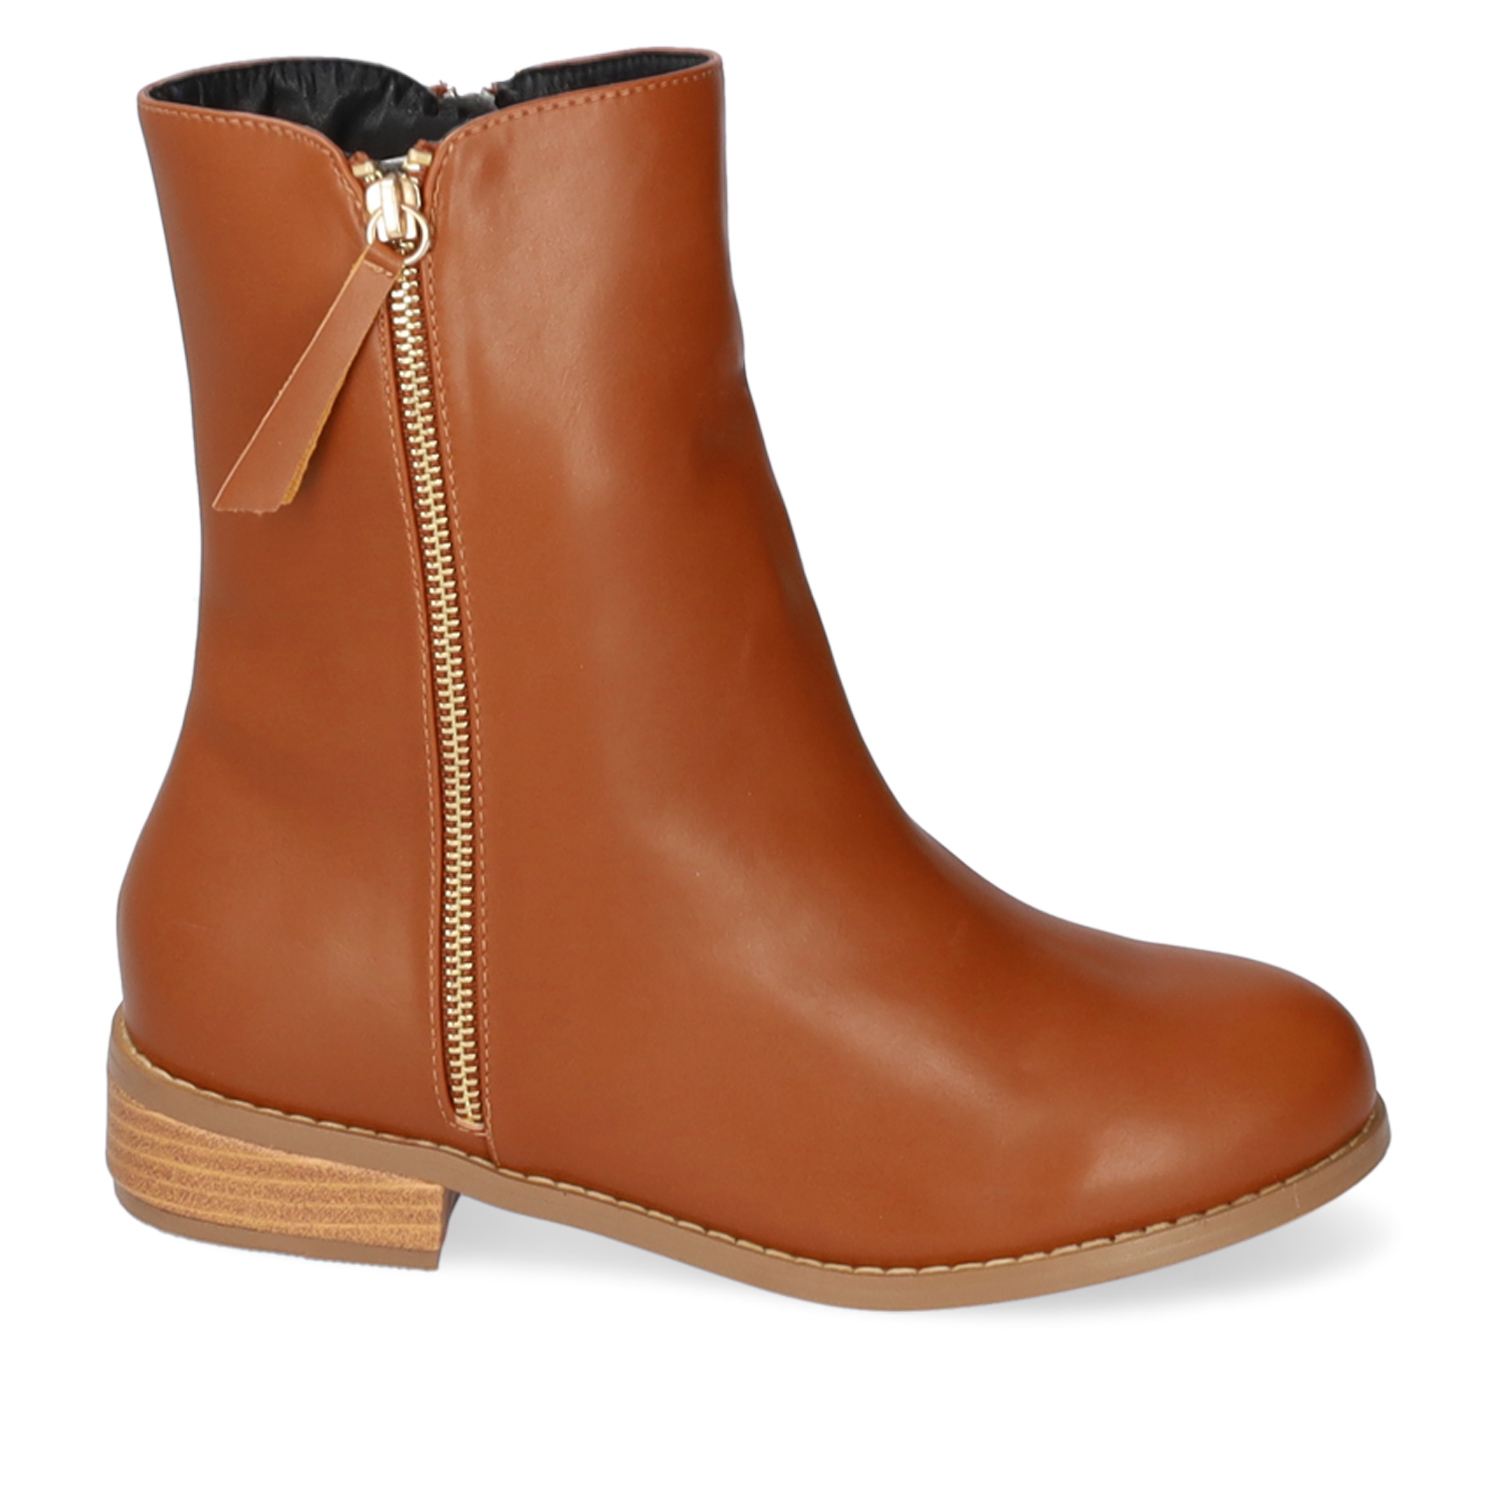 High-top booties in camel faux leather 